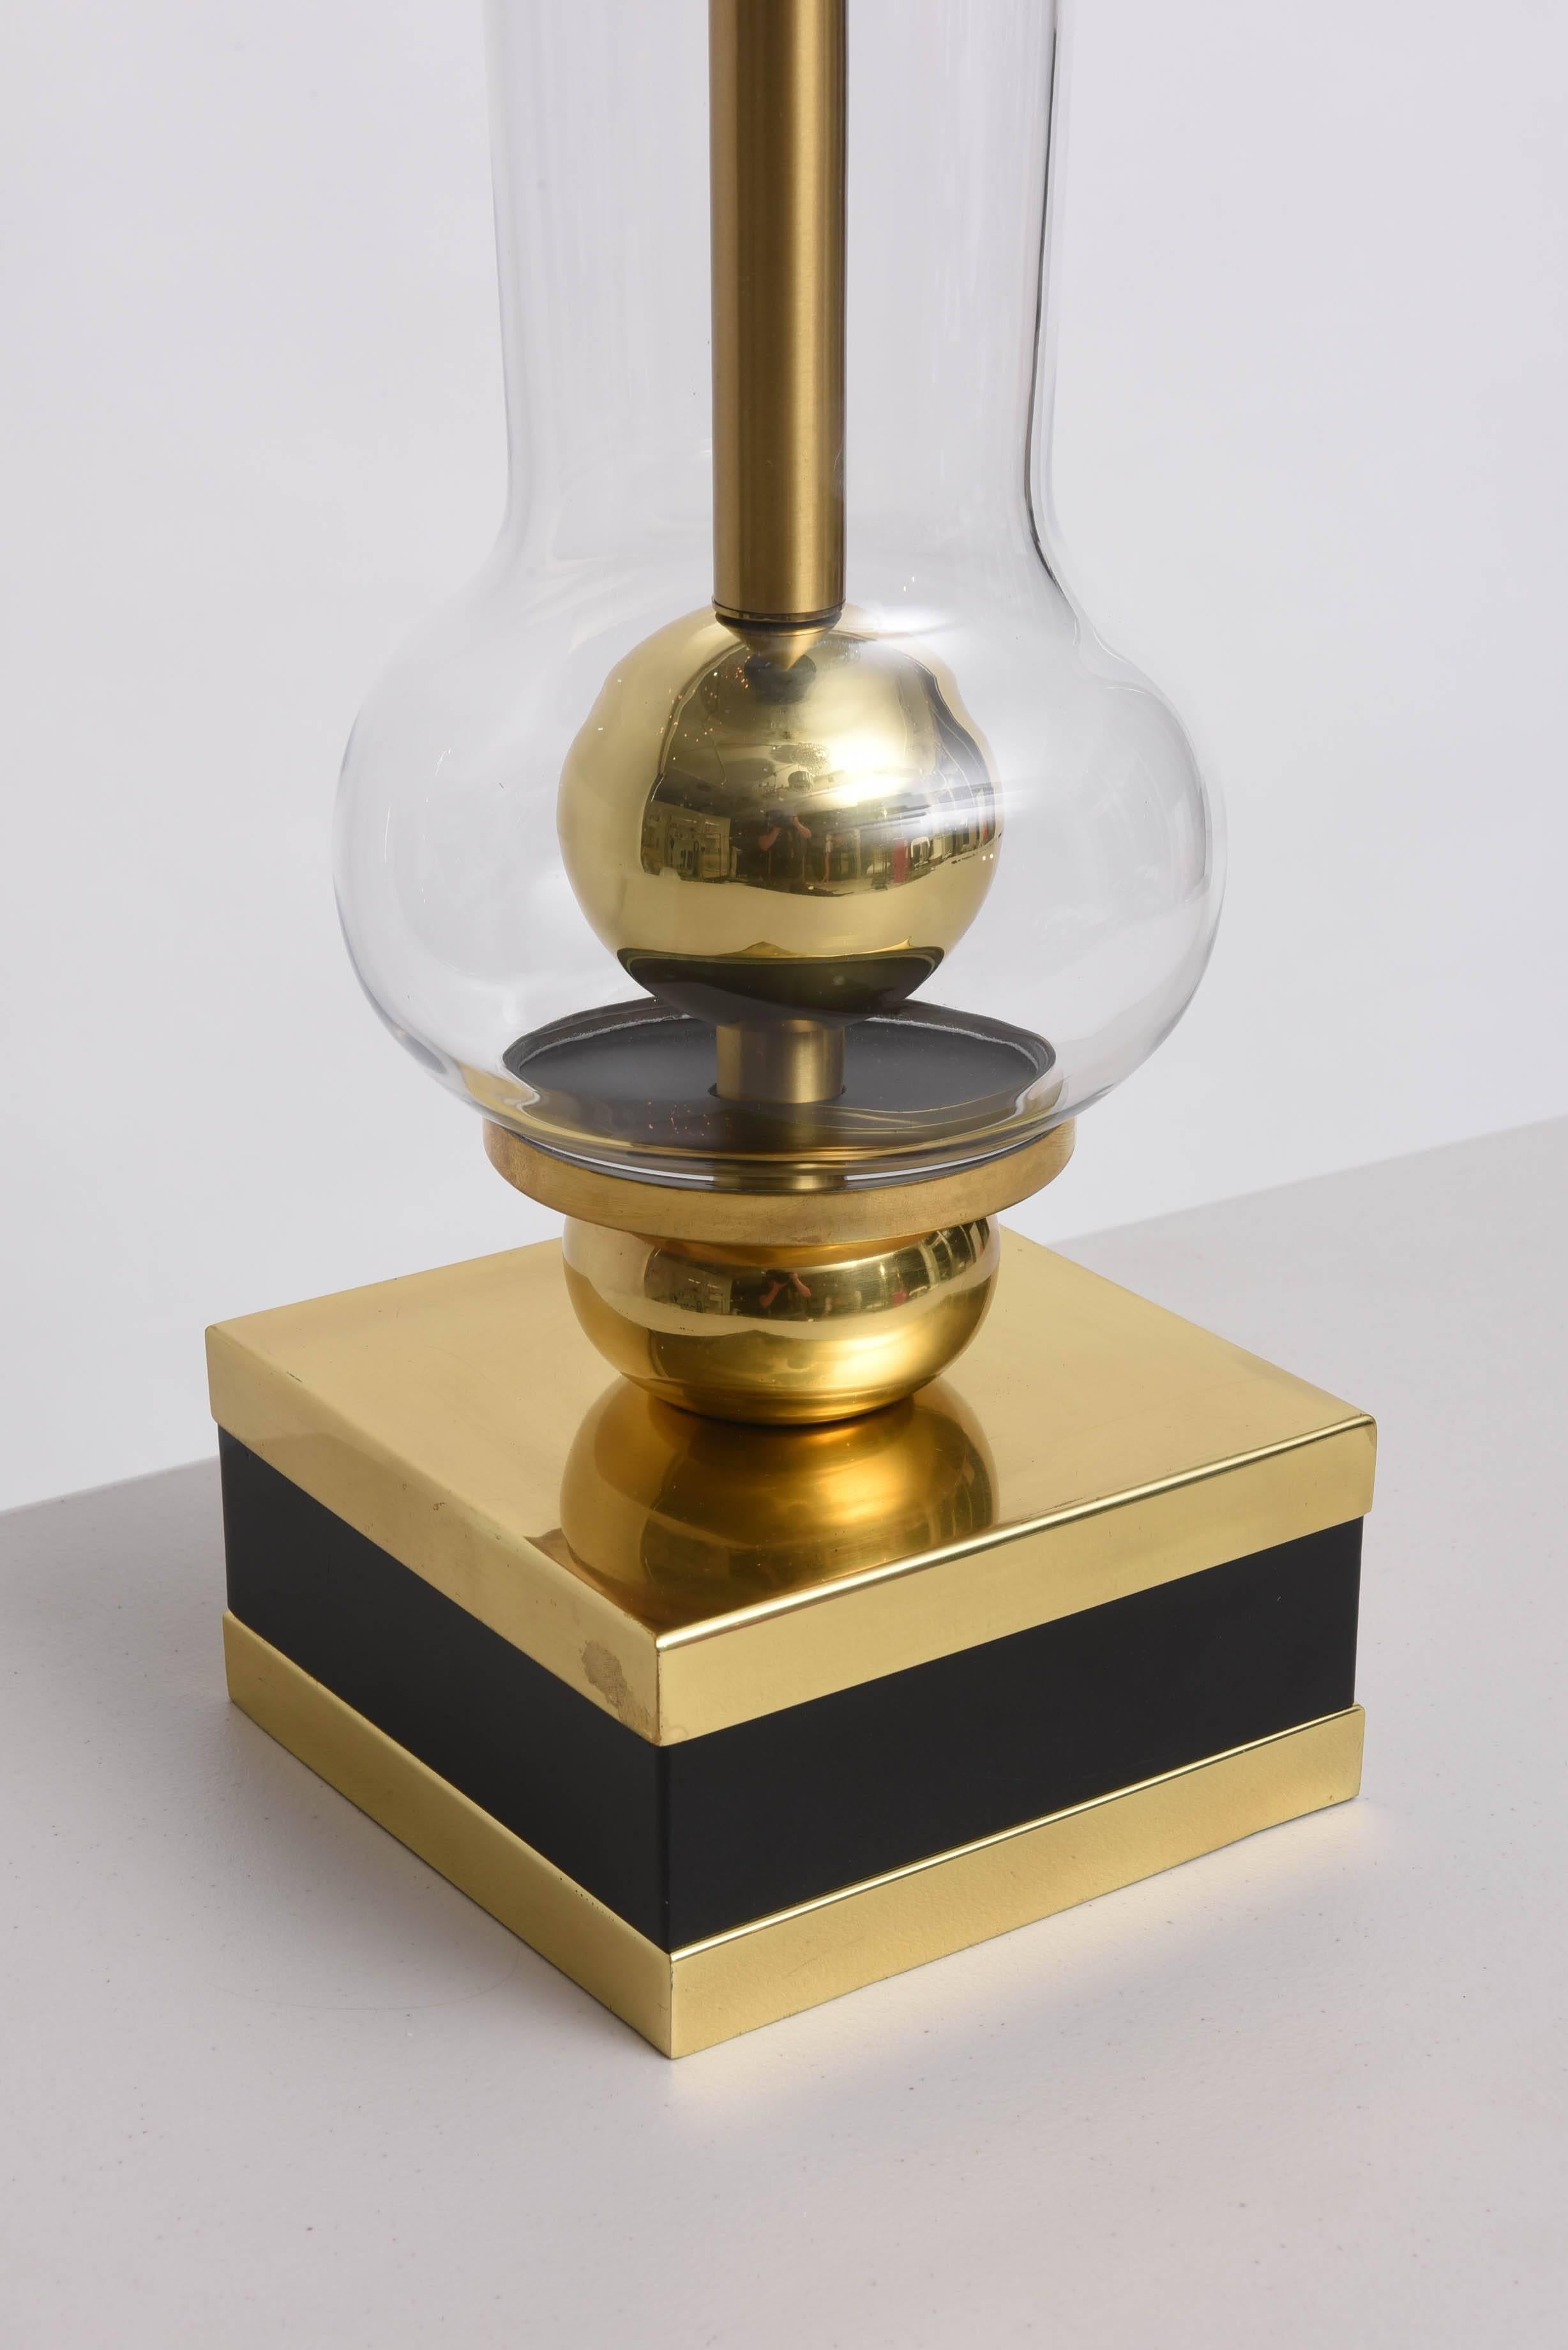 Mid-Century Modern Midcentury Table Lamp, Brass and Glass, Attributed to Studio Willy Rizzo